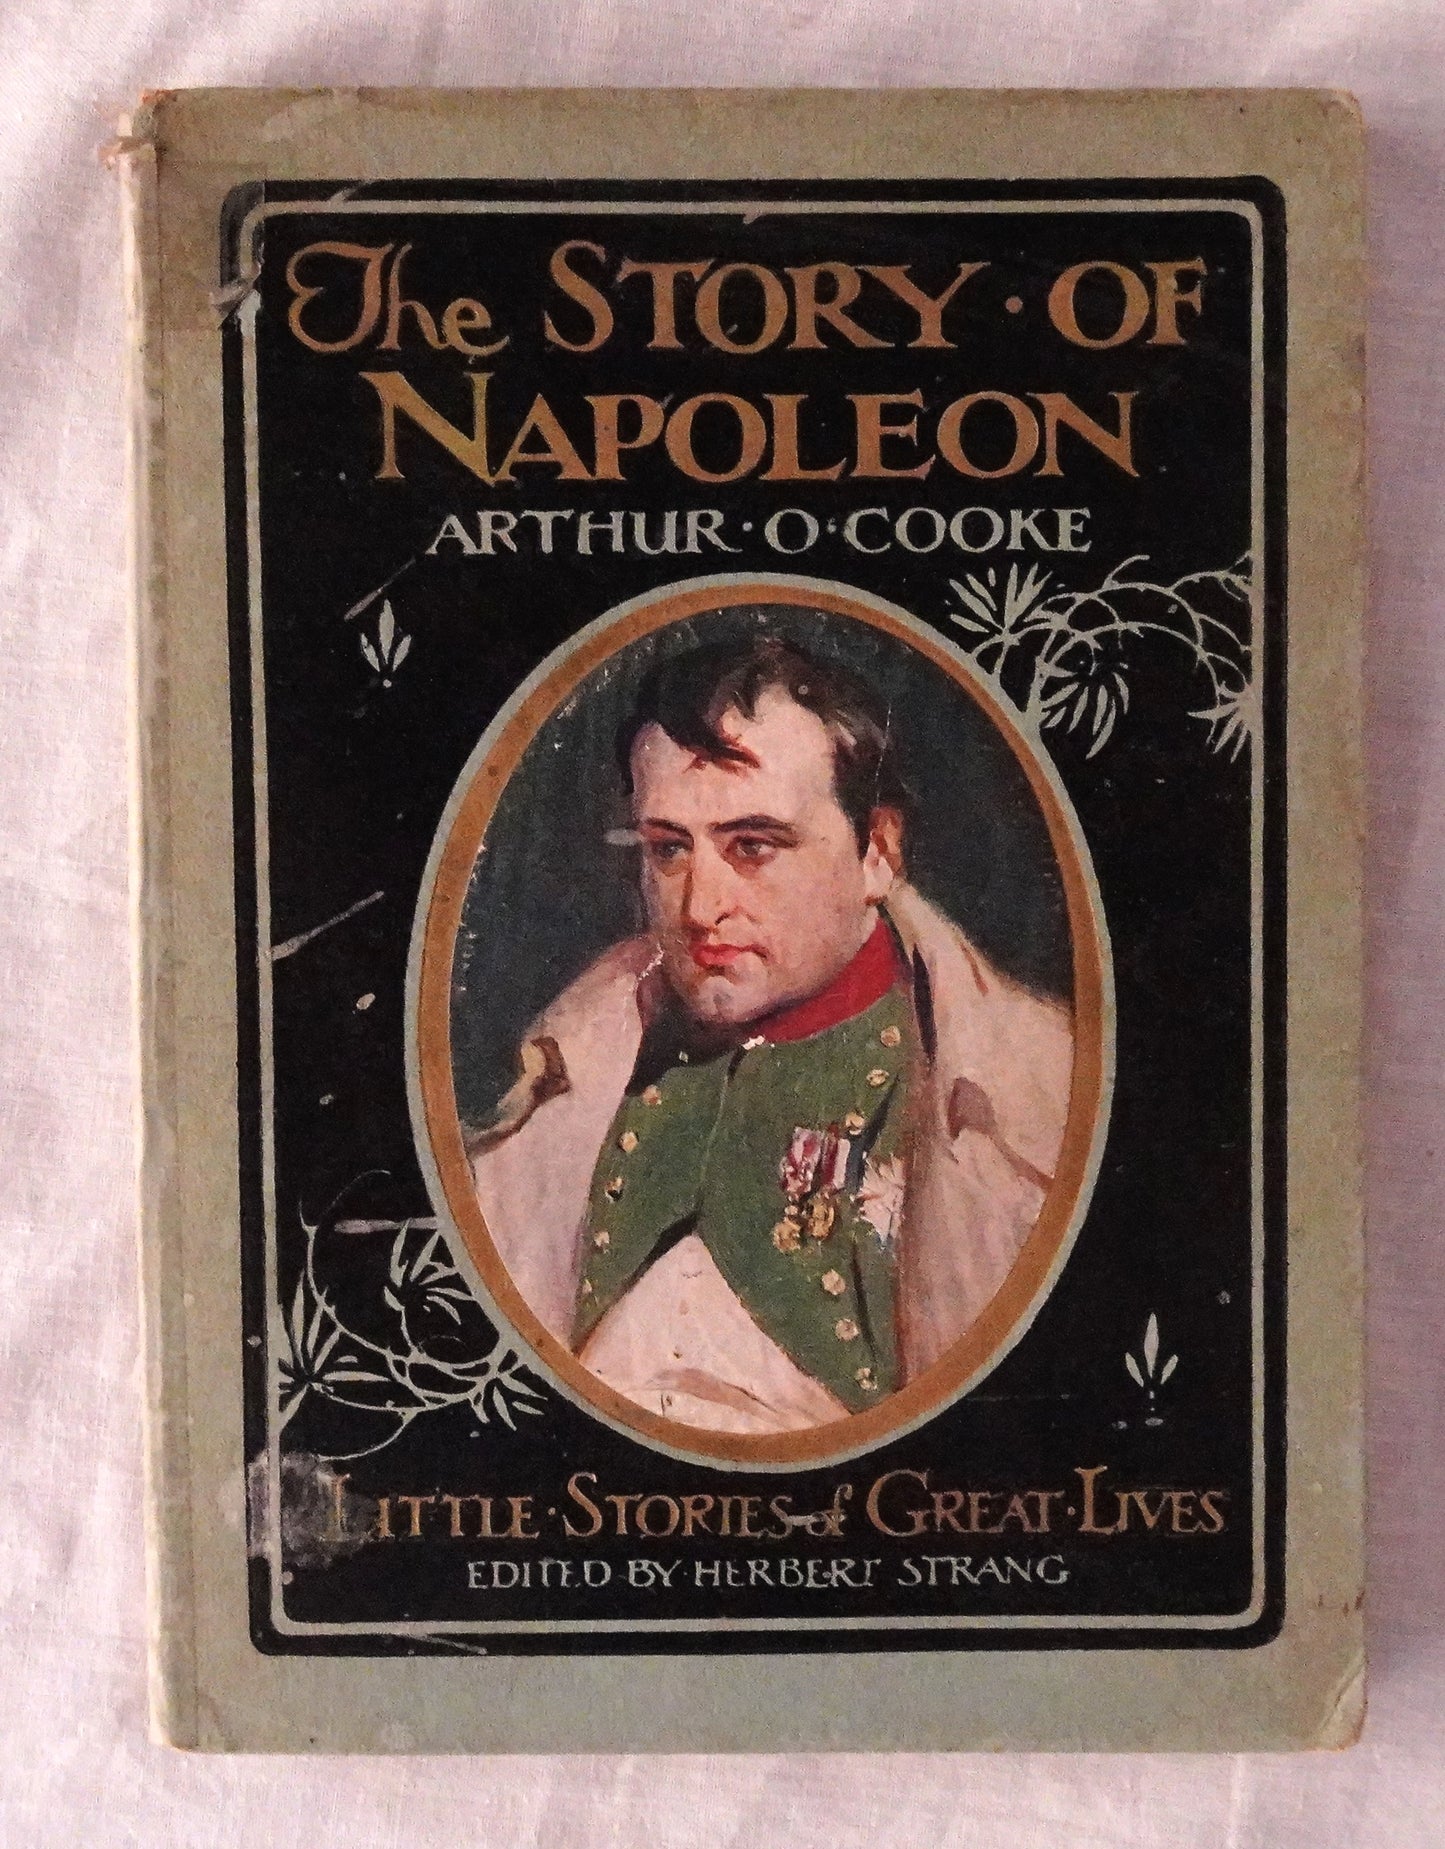 The Story of Napoleon Bonaparte  by Arthur O. Cooke  (Little Stories of Great Lives edited by Herbert Strang)